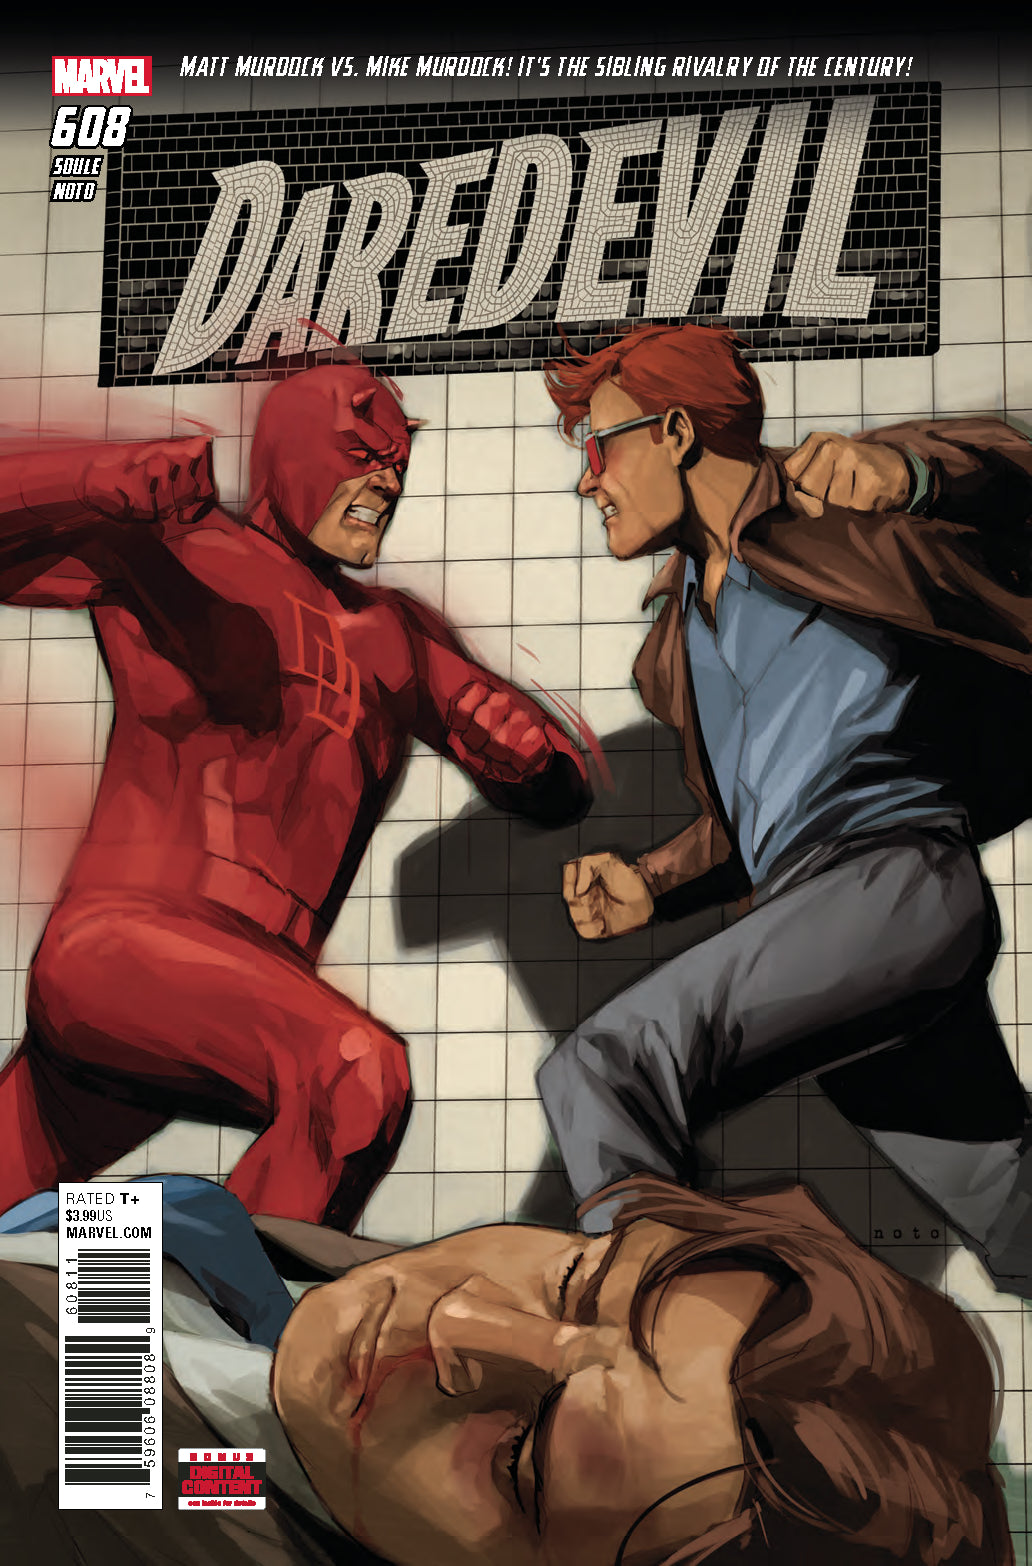 Photo of Daredevil Issue 608 comic sold by Stronghold Collectibles